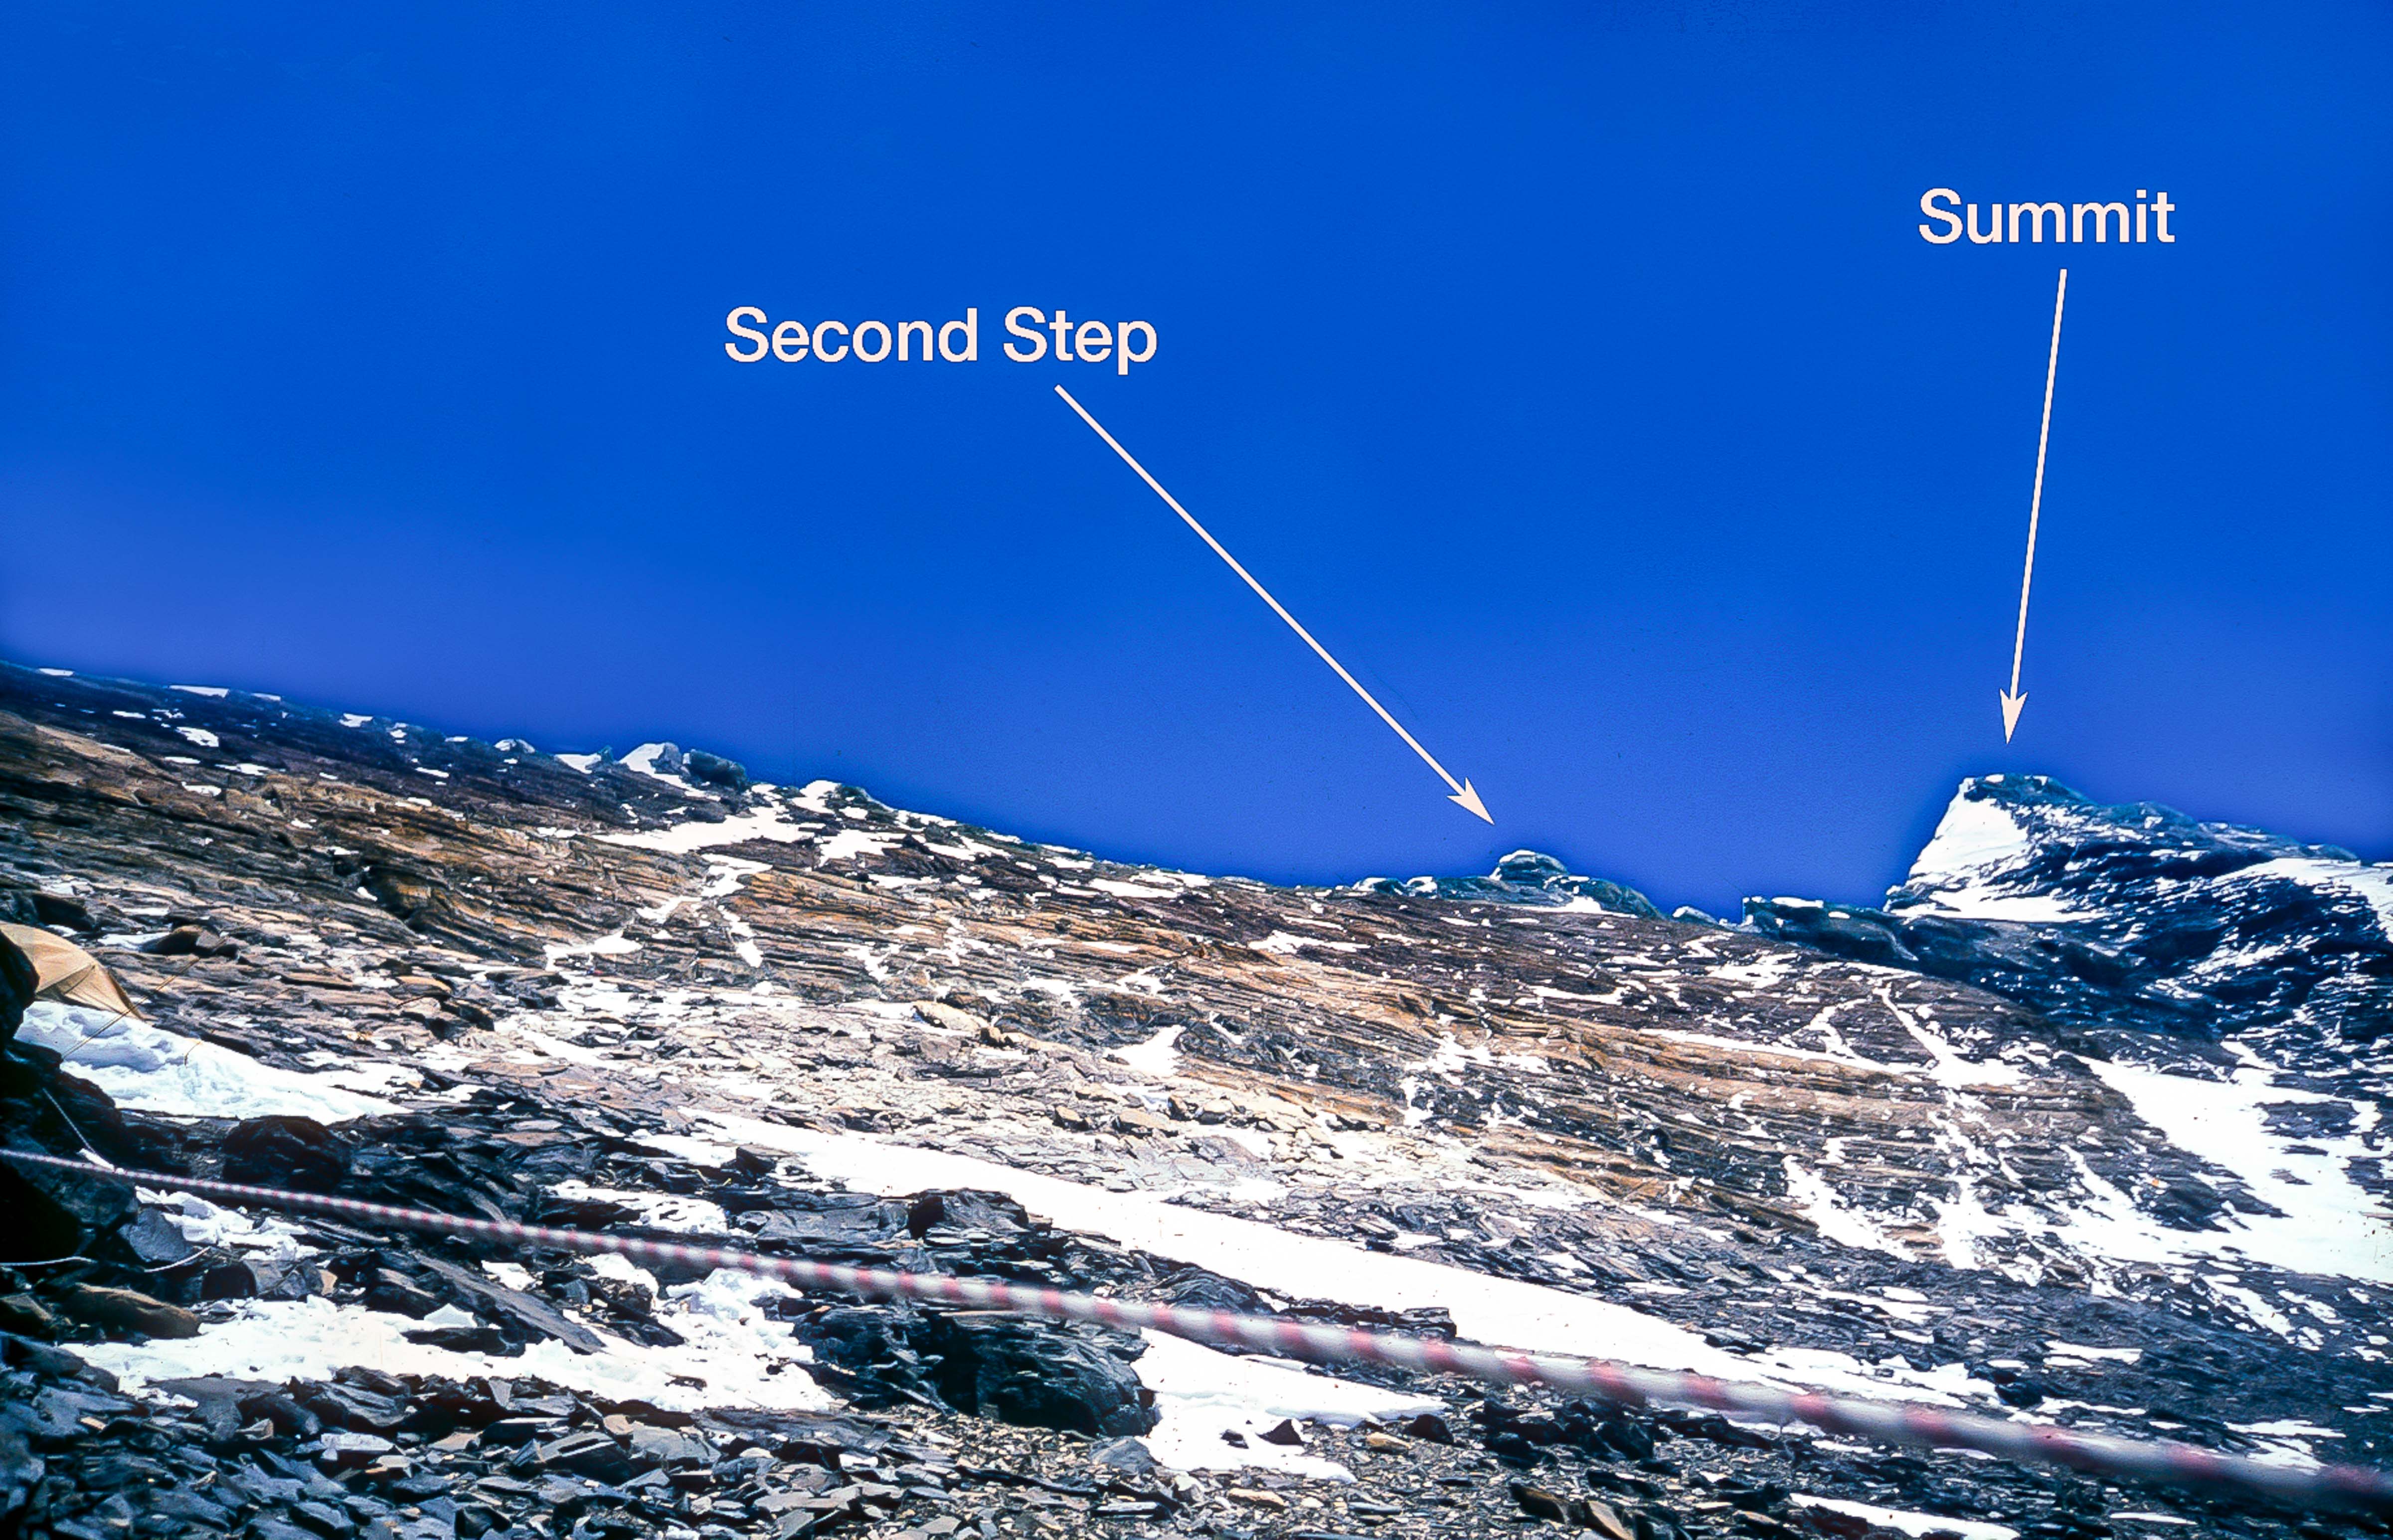 Tibet, Everest, North Ridge Route, Camp 3, Showing Second Step, Summit Pyramid, 8200m, 1995